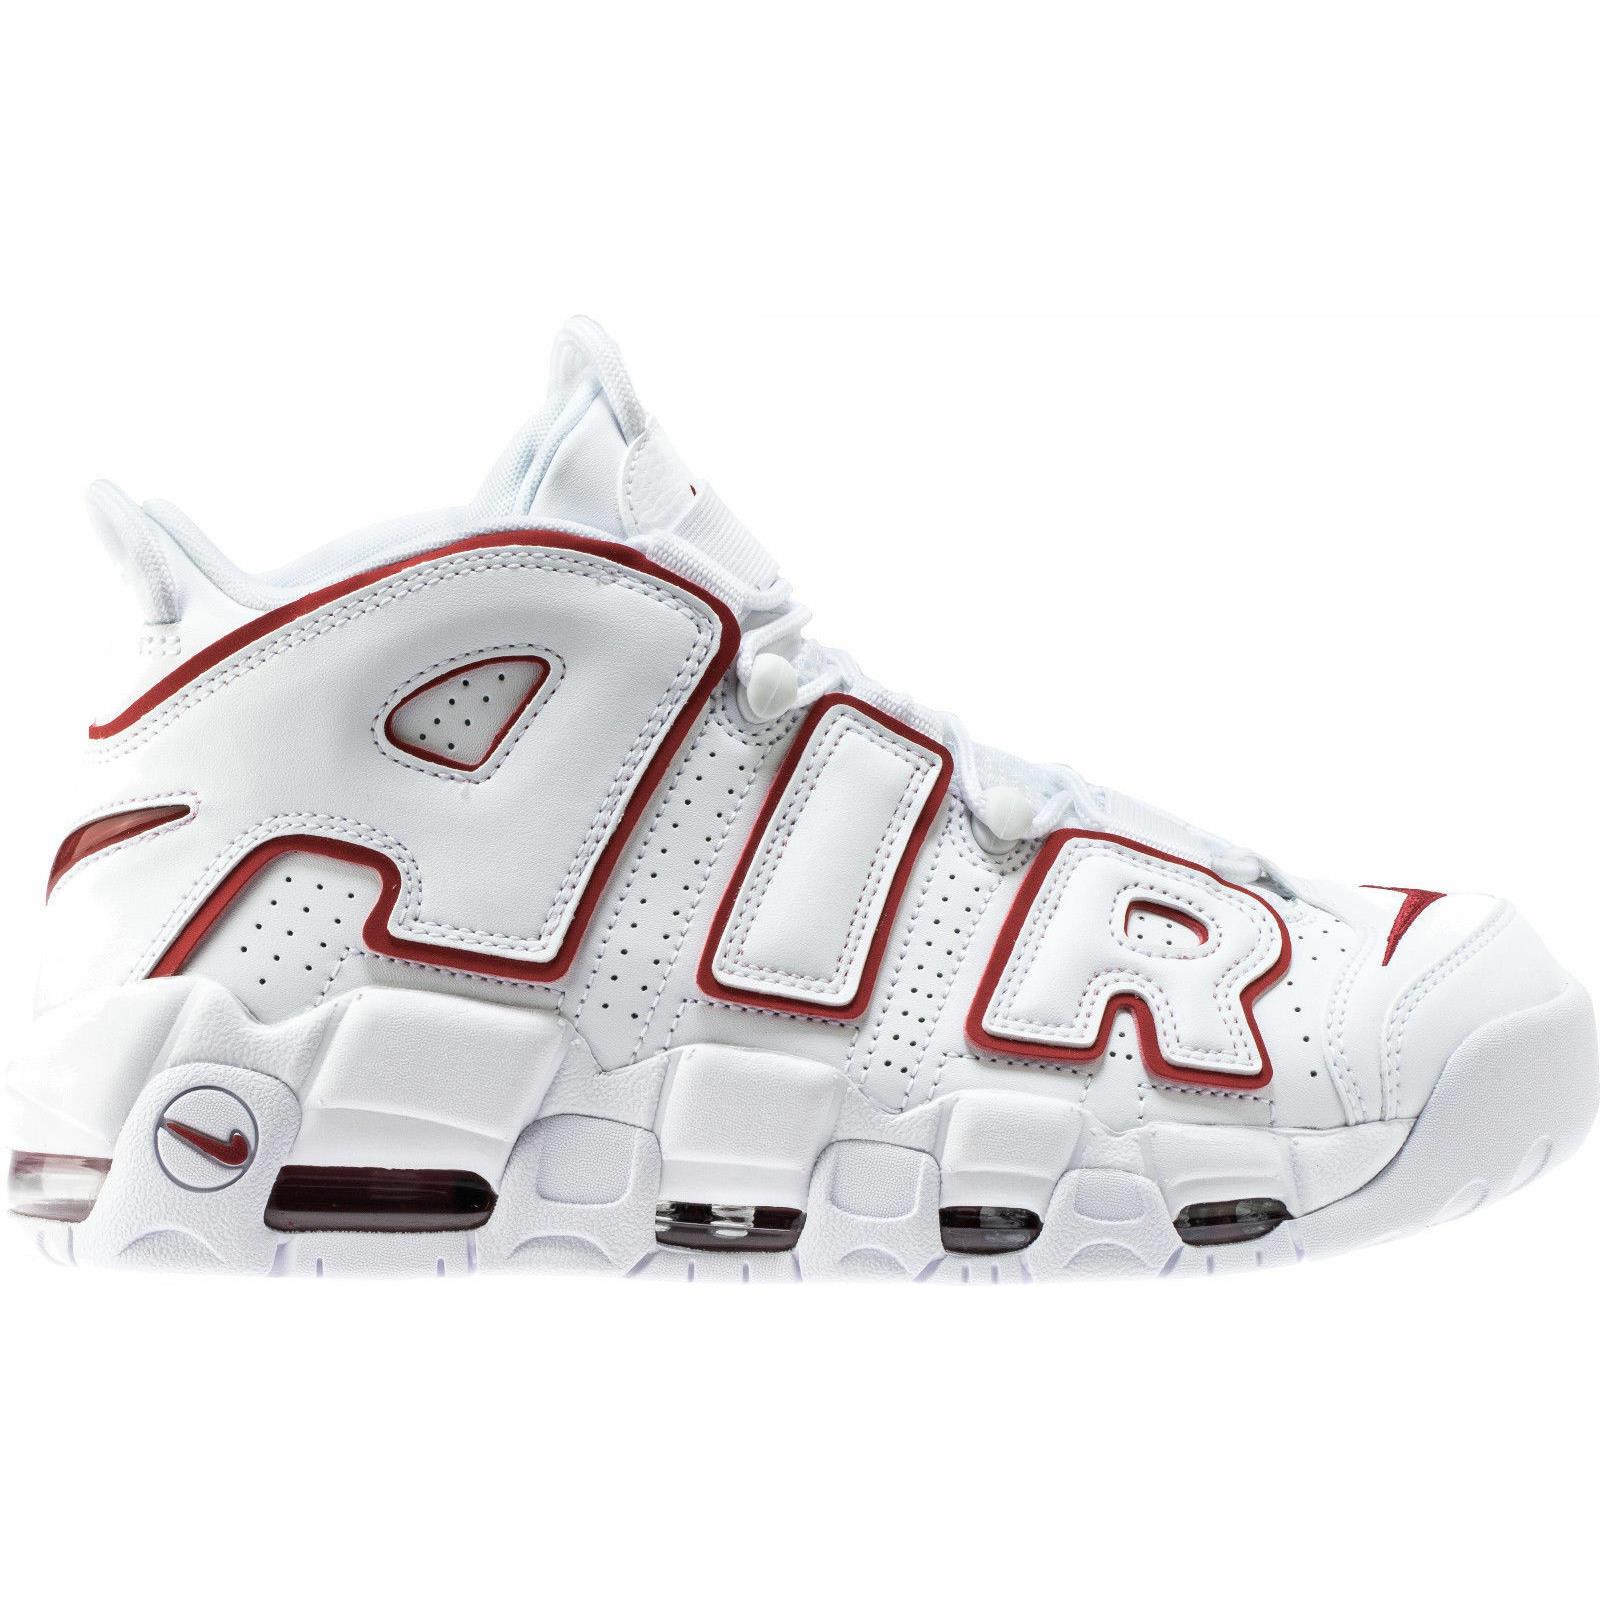 Nike Air More Uptempo 96 White Varsity Red Size 10.5 921948-102 Pippen